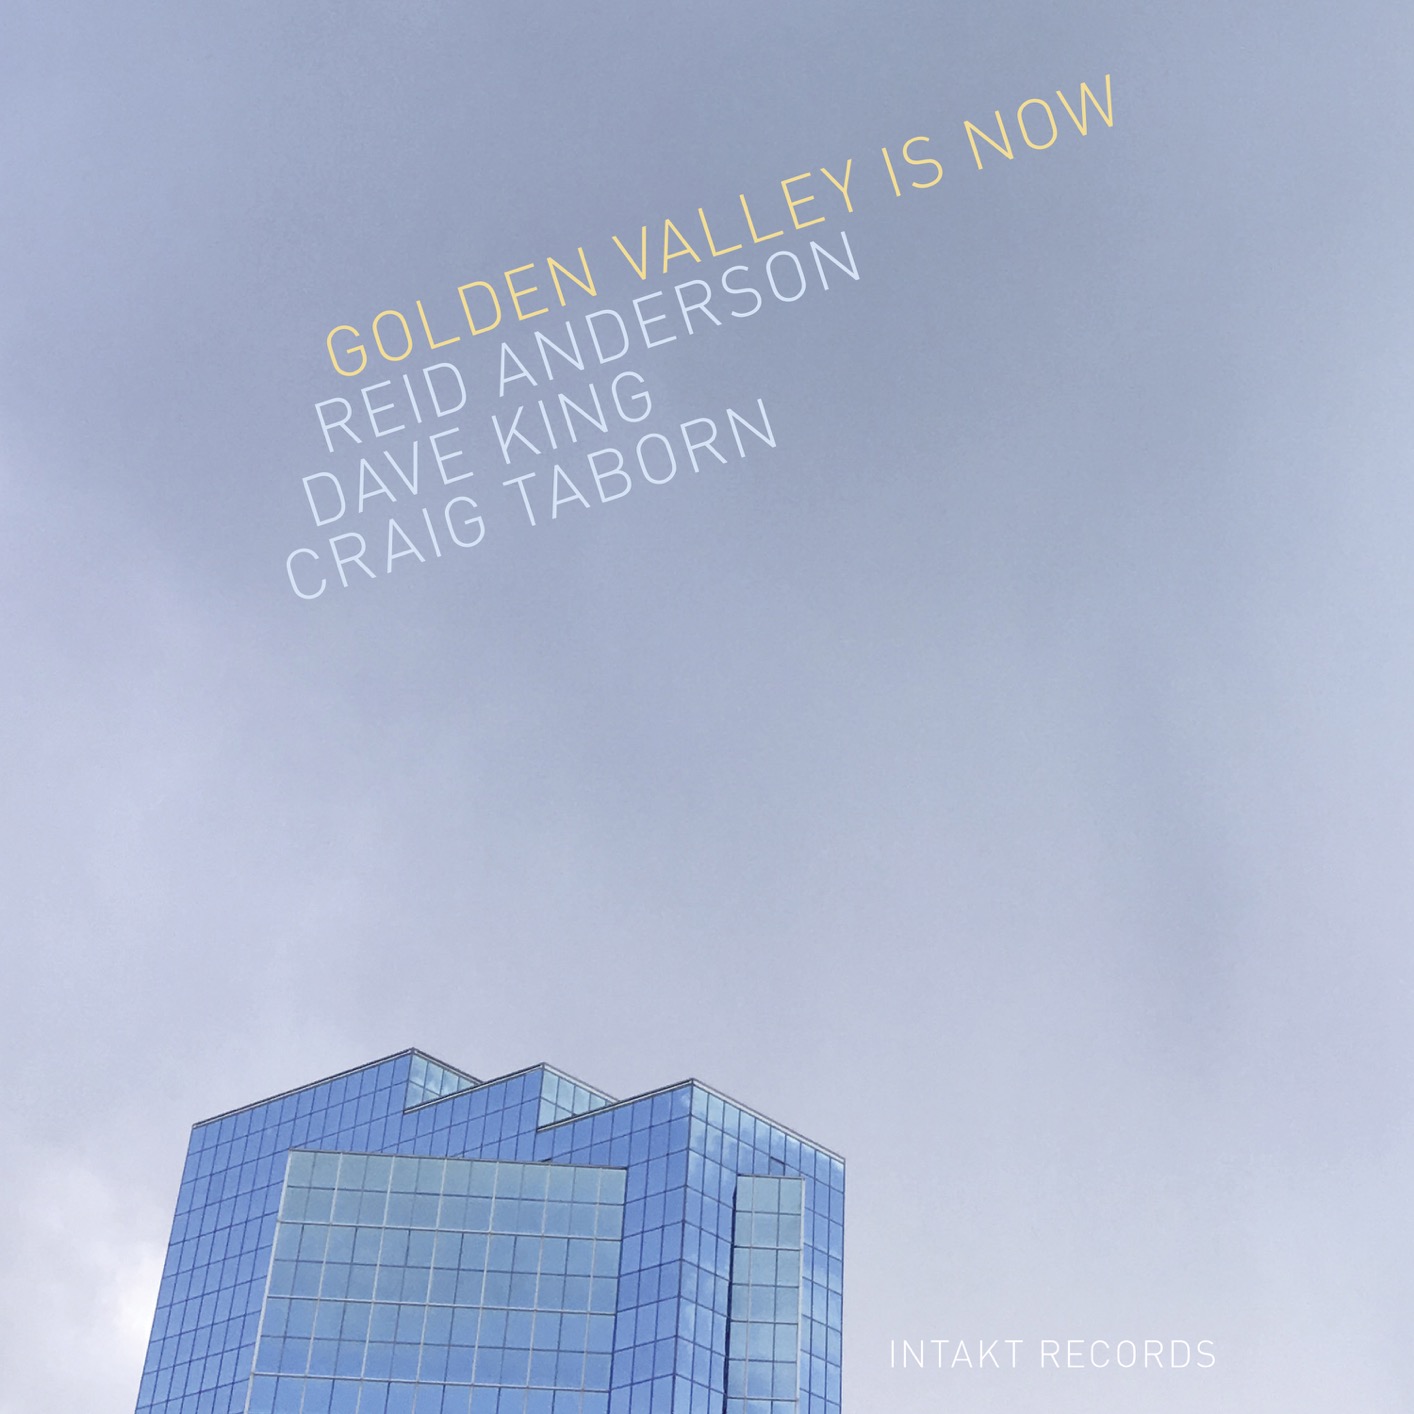 Reid Anderson, Dave King & Craig Taborn – Golden Valley Is Now (2019) [FLAC 24bit/48kHz]